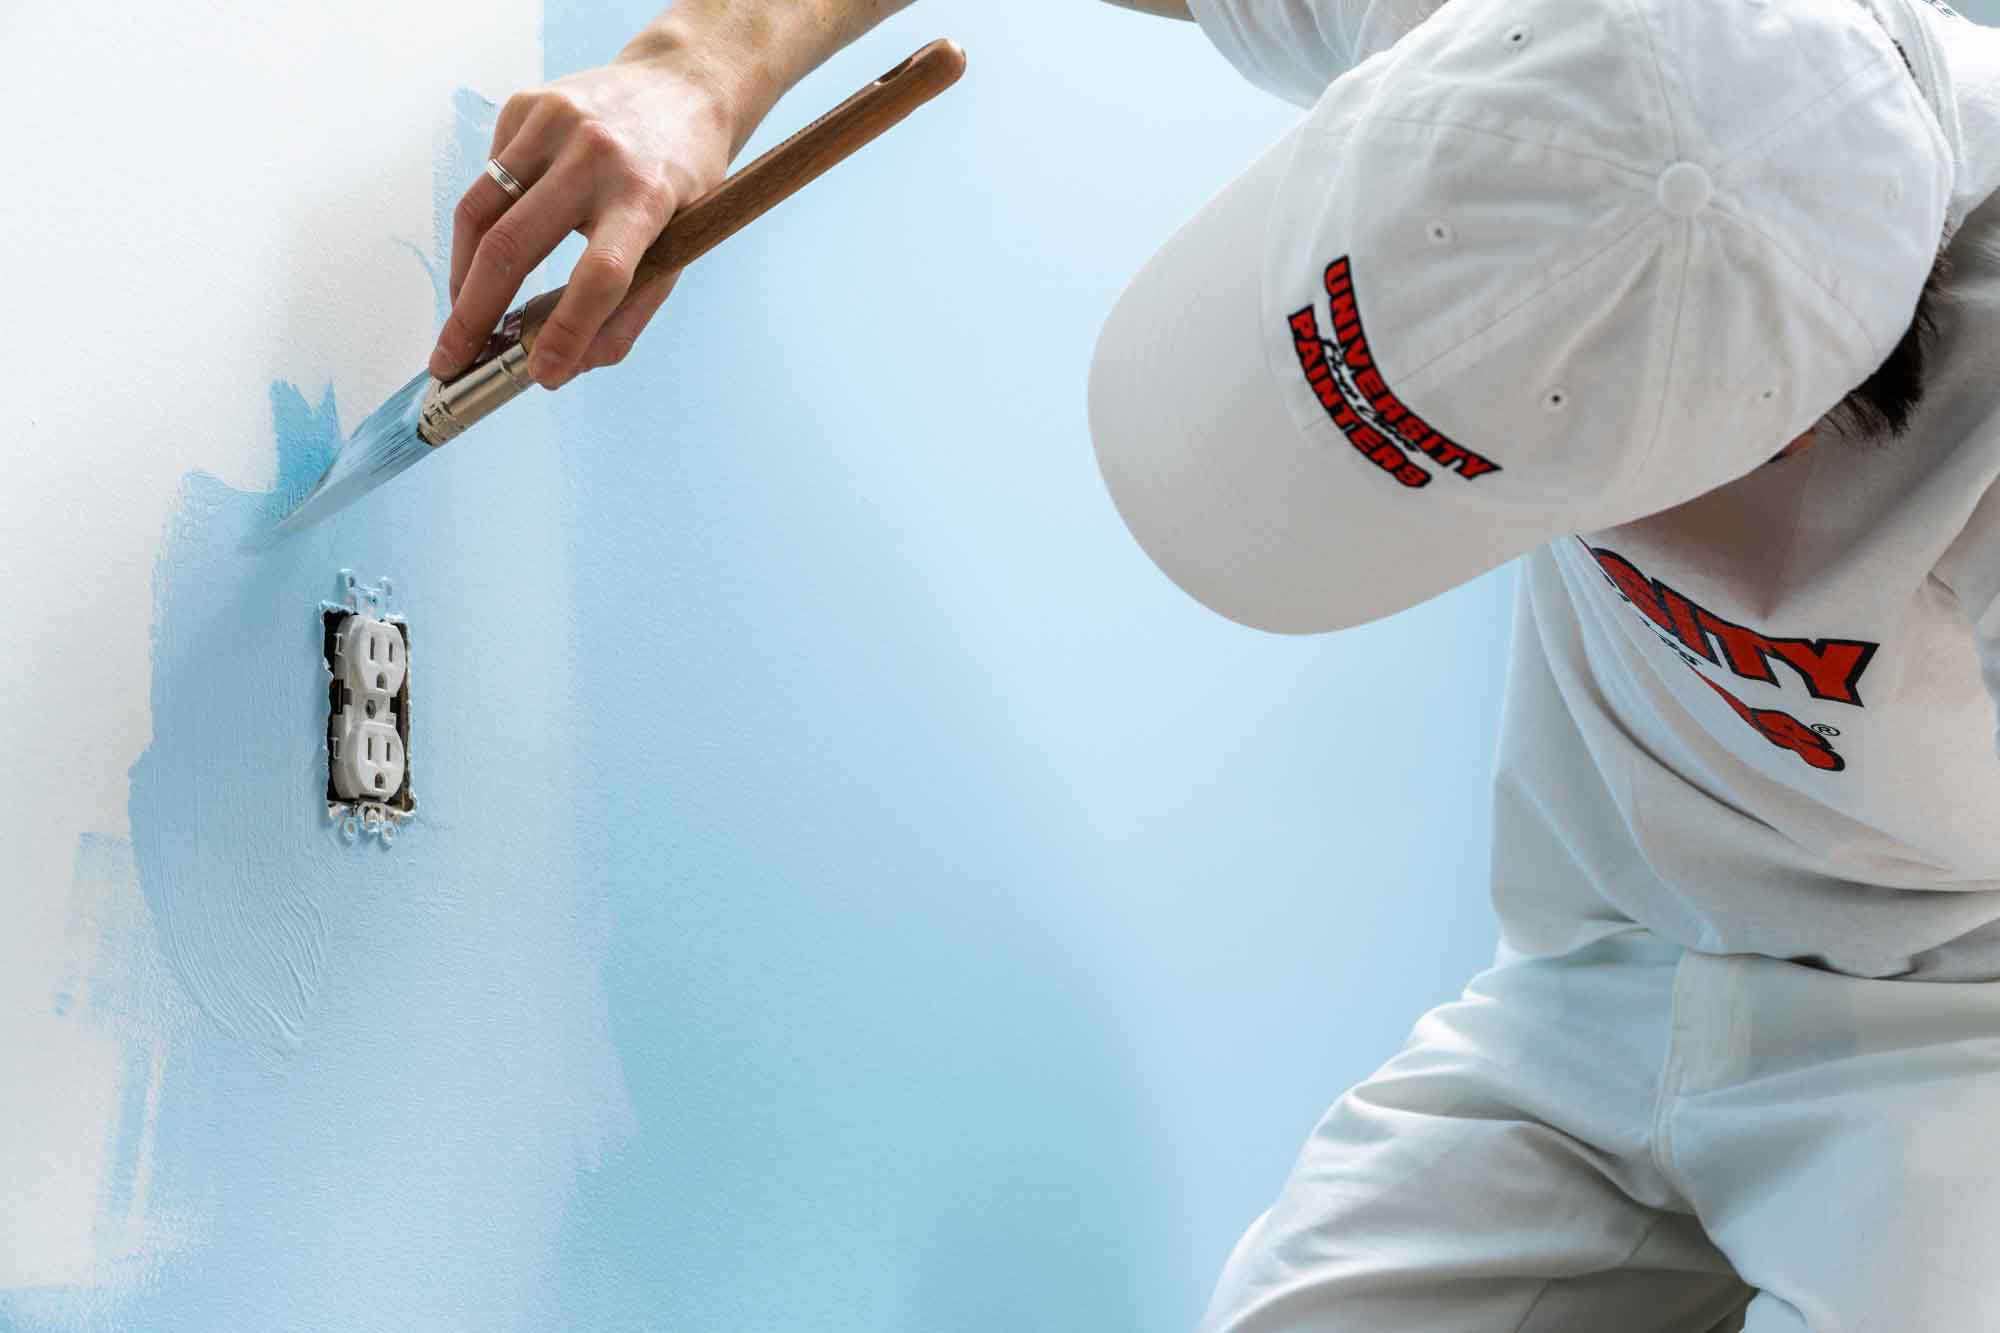 painter working around an outlet